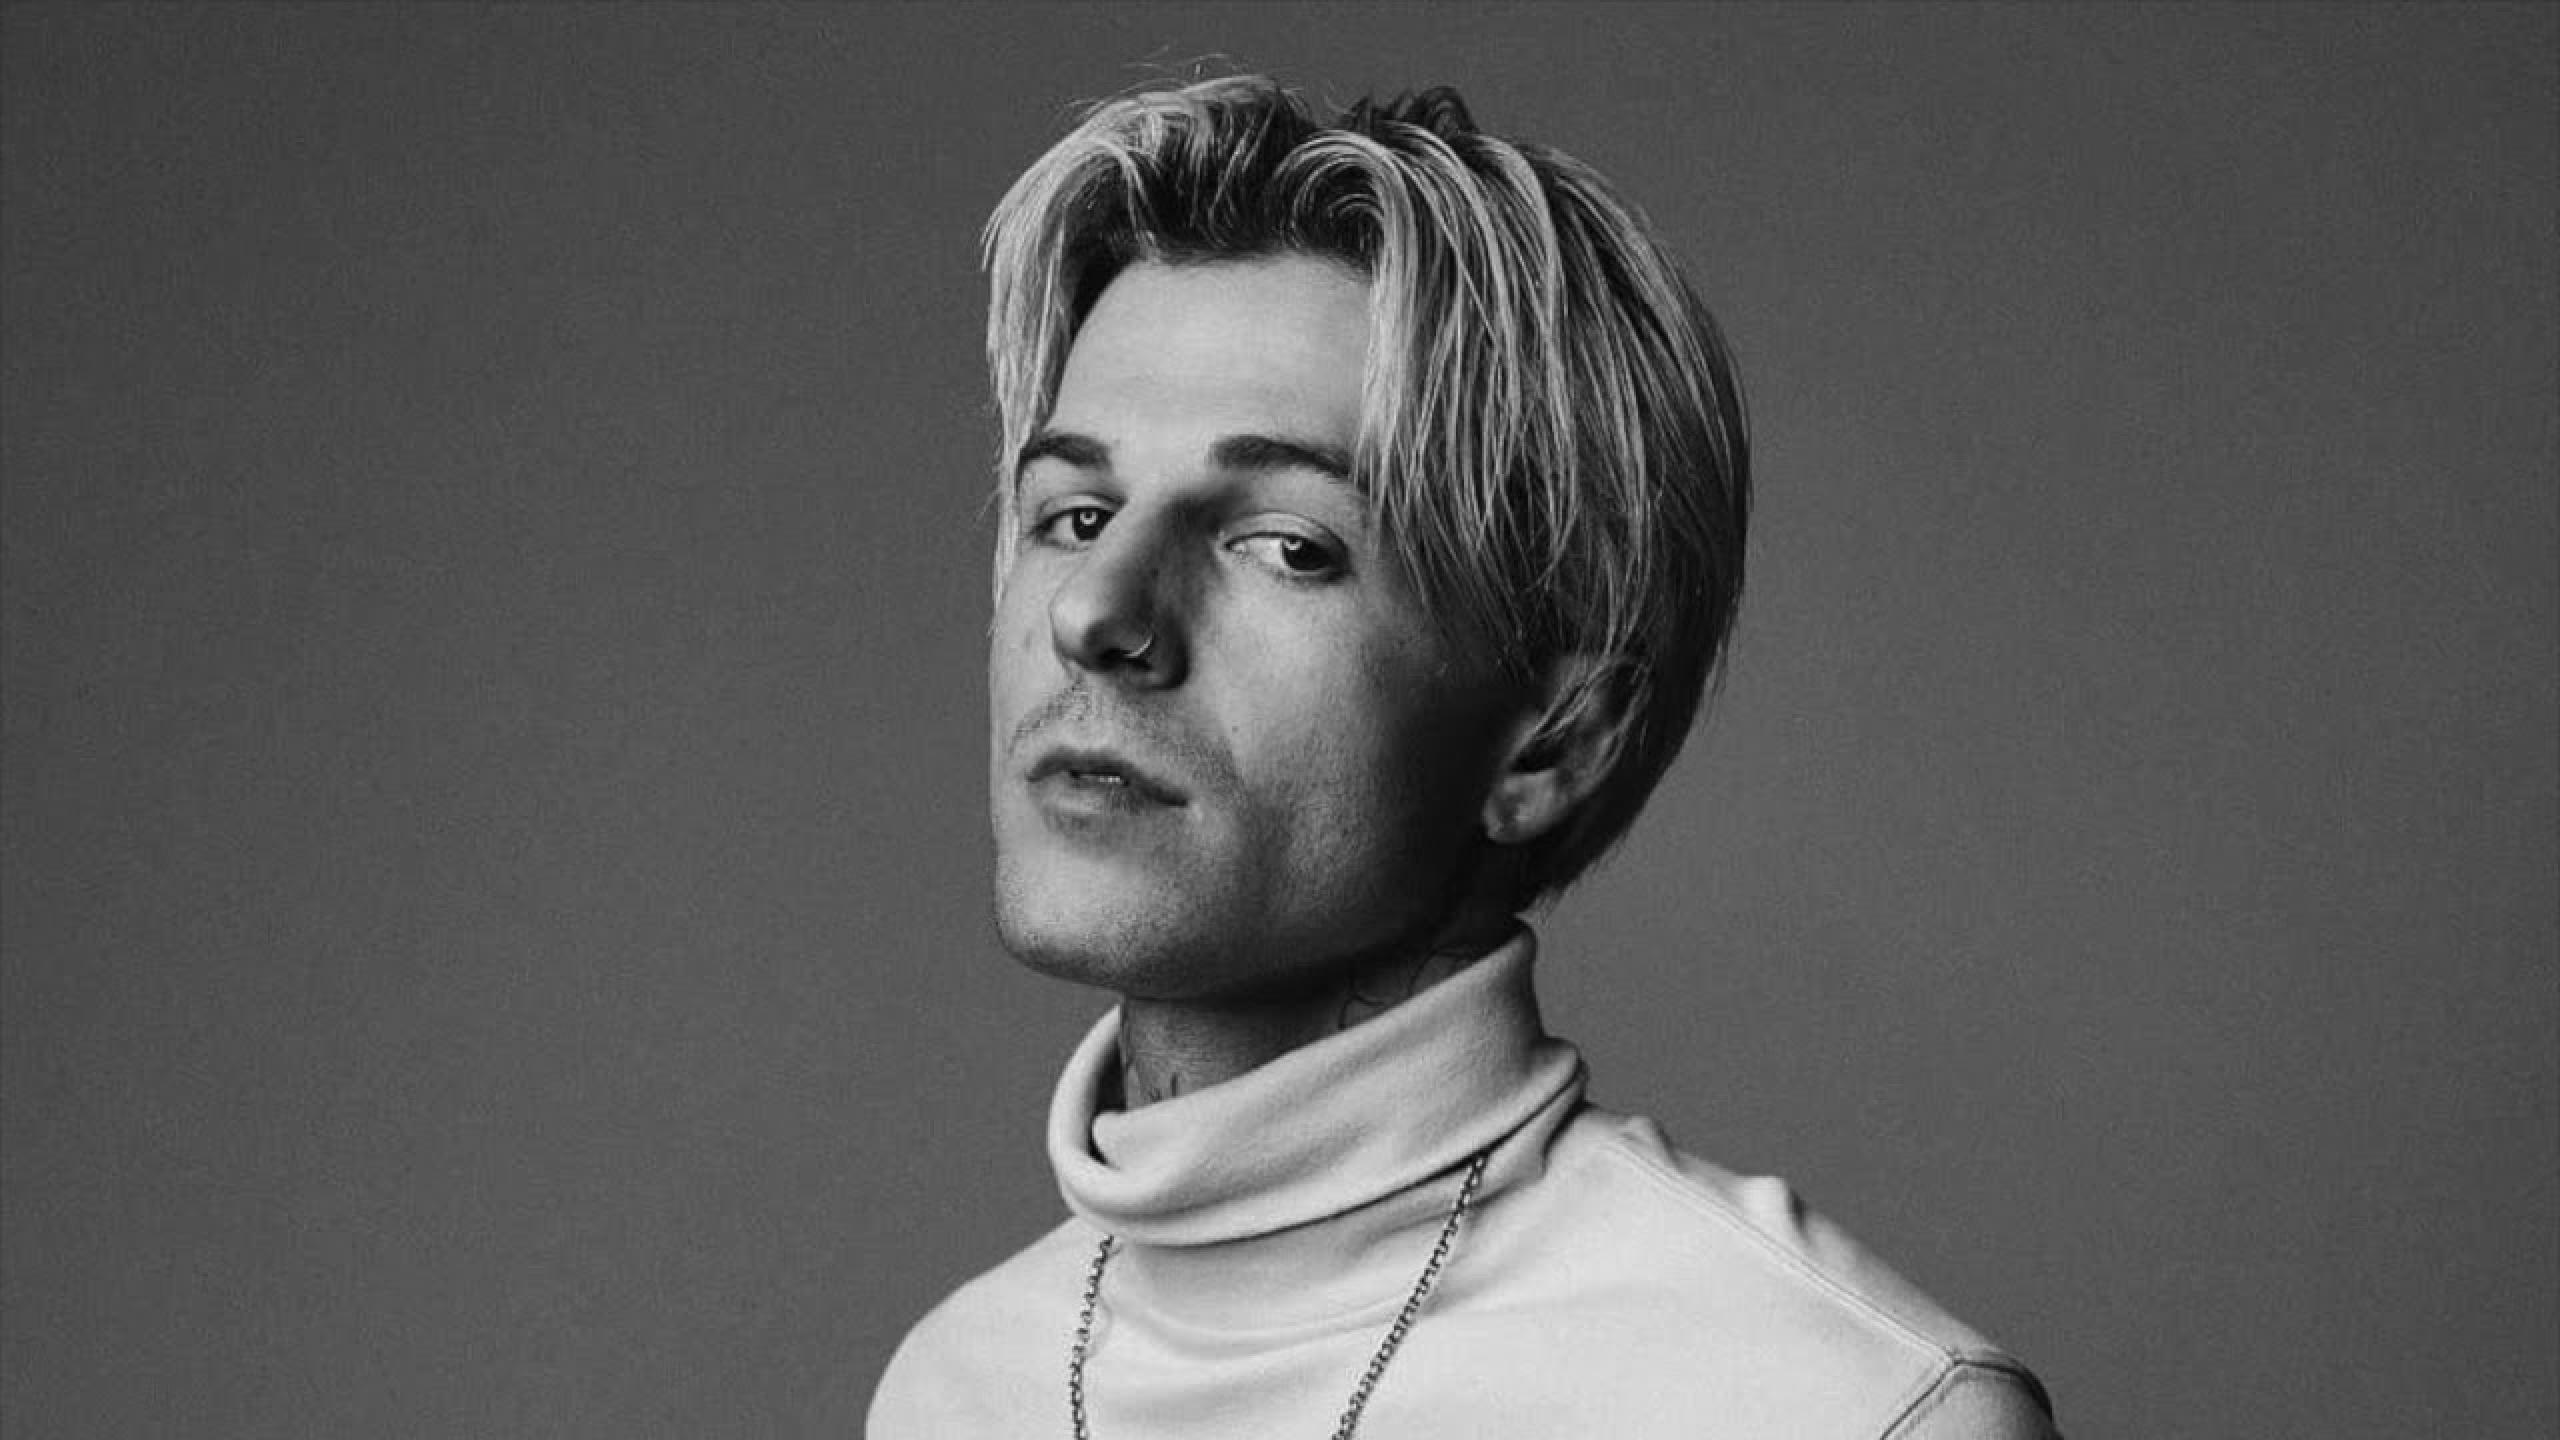 34 Facts About Jesse Rutherford - Facts.net